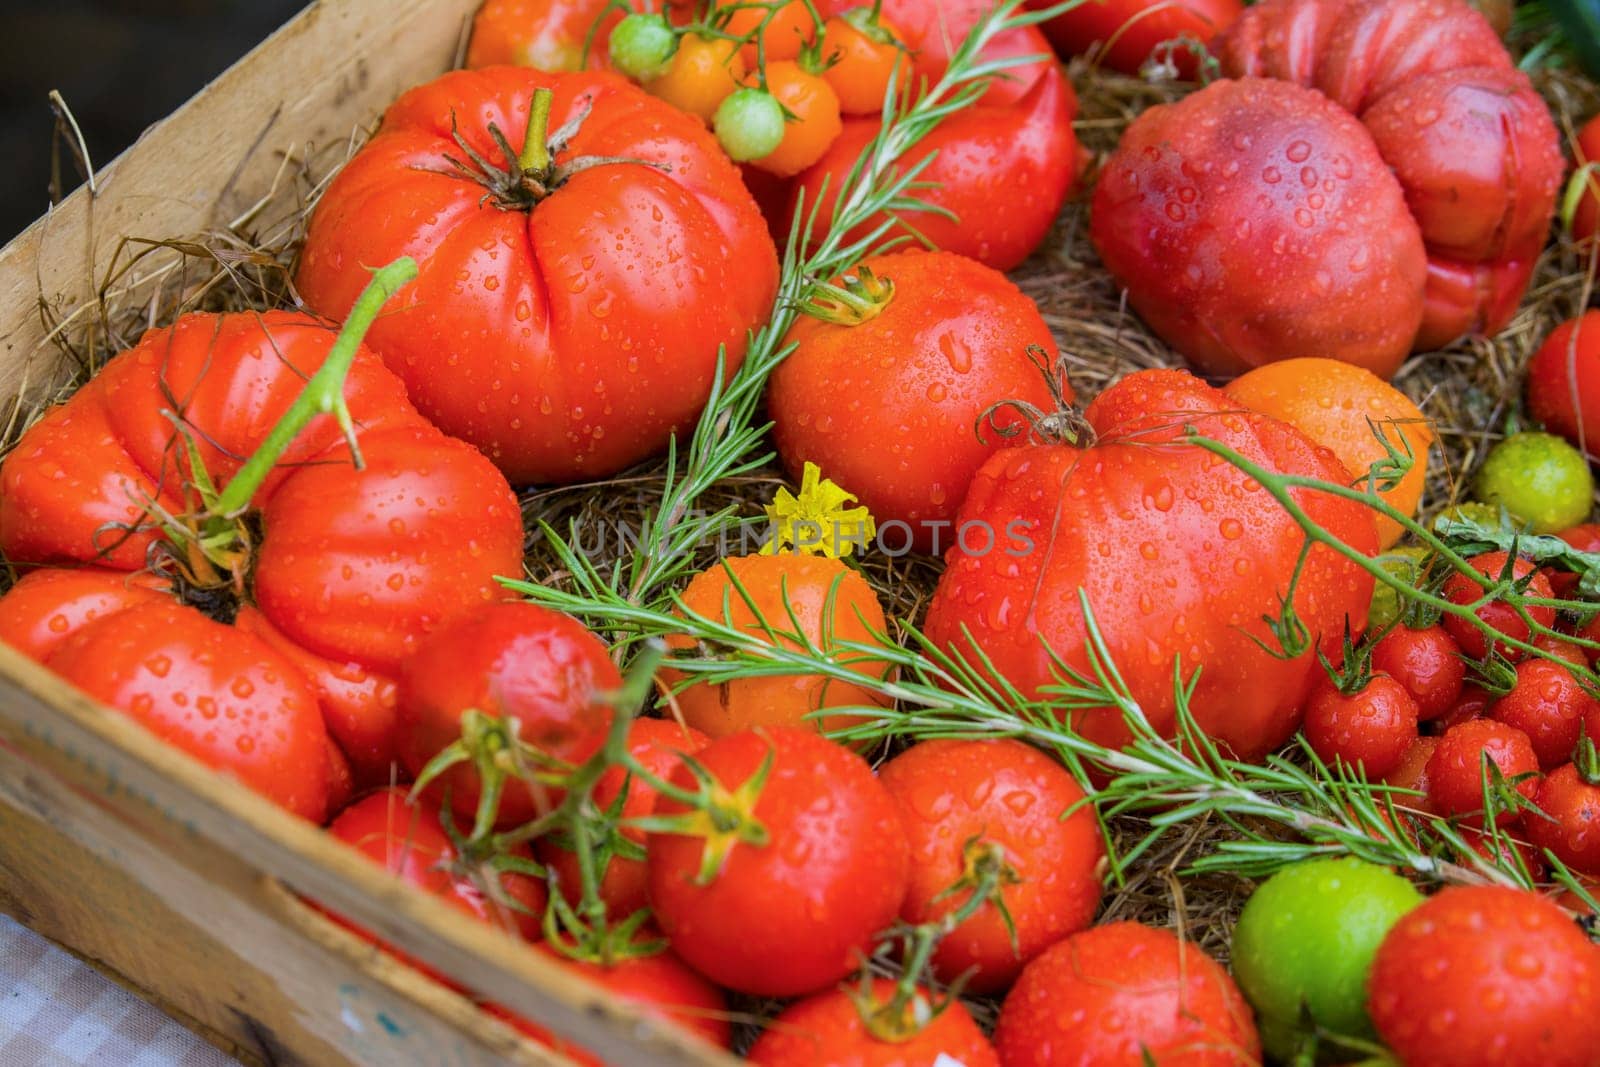 Different kinds of tomato bio in the market